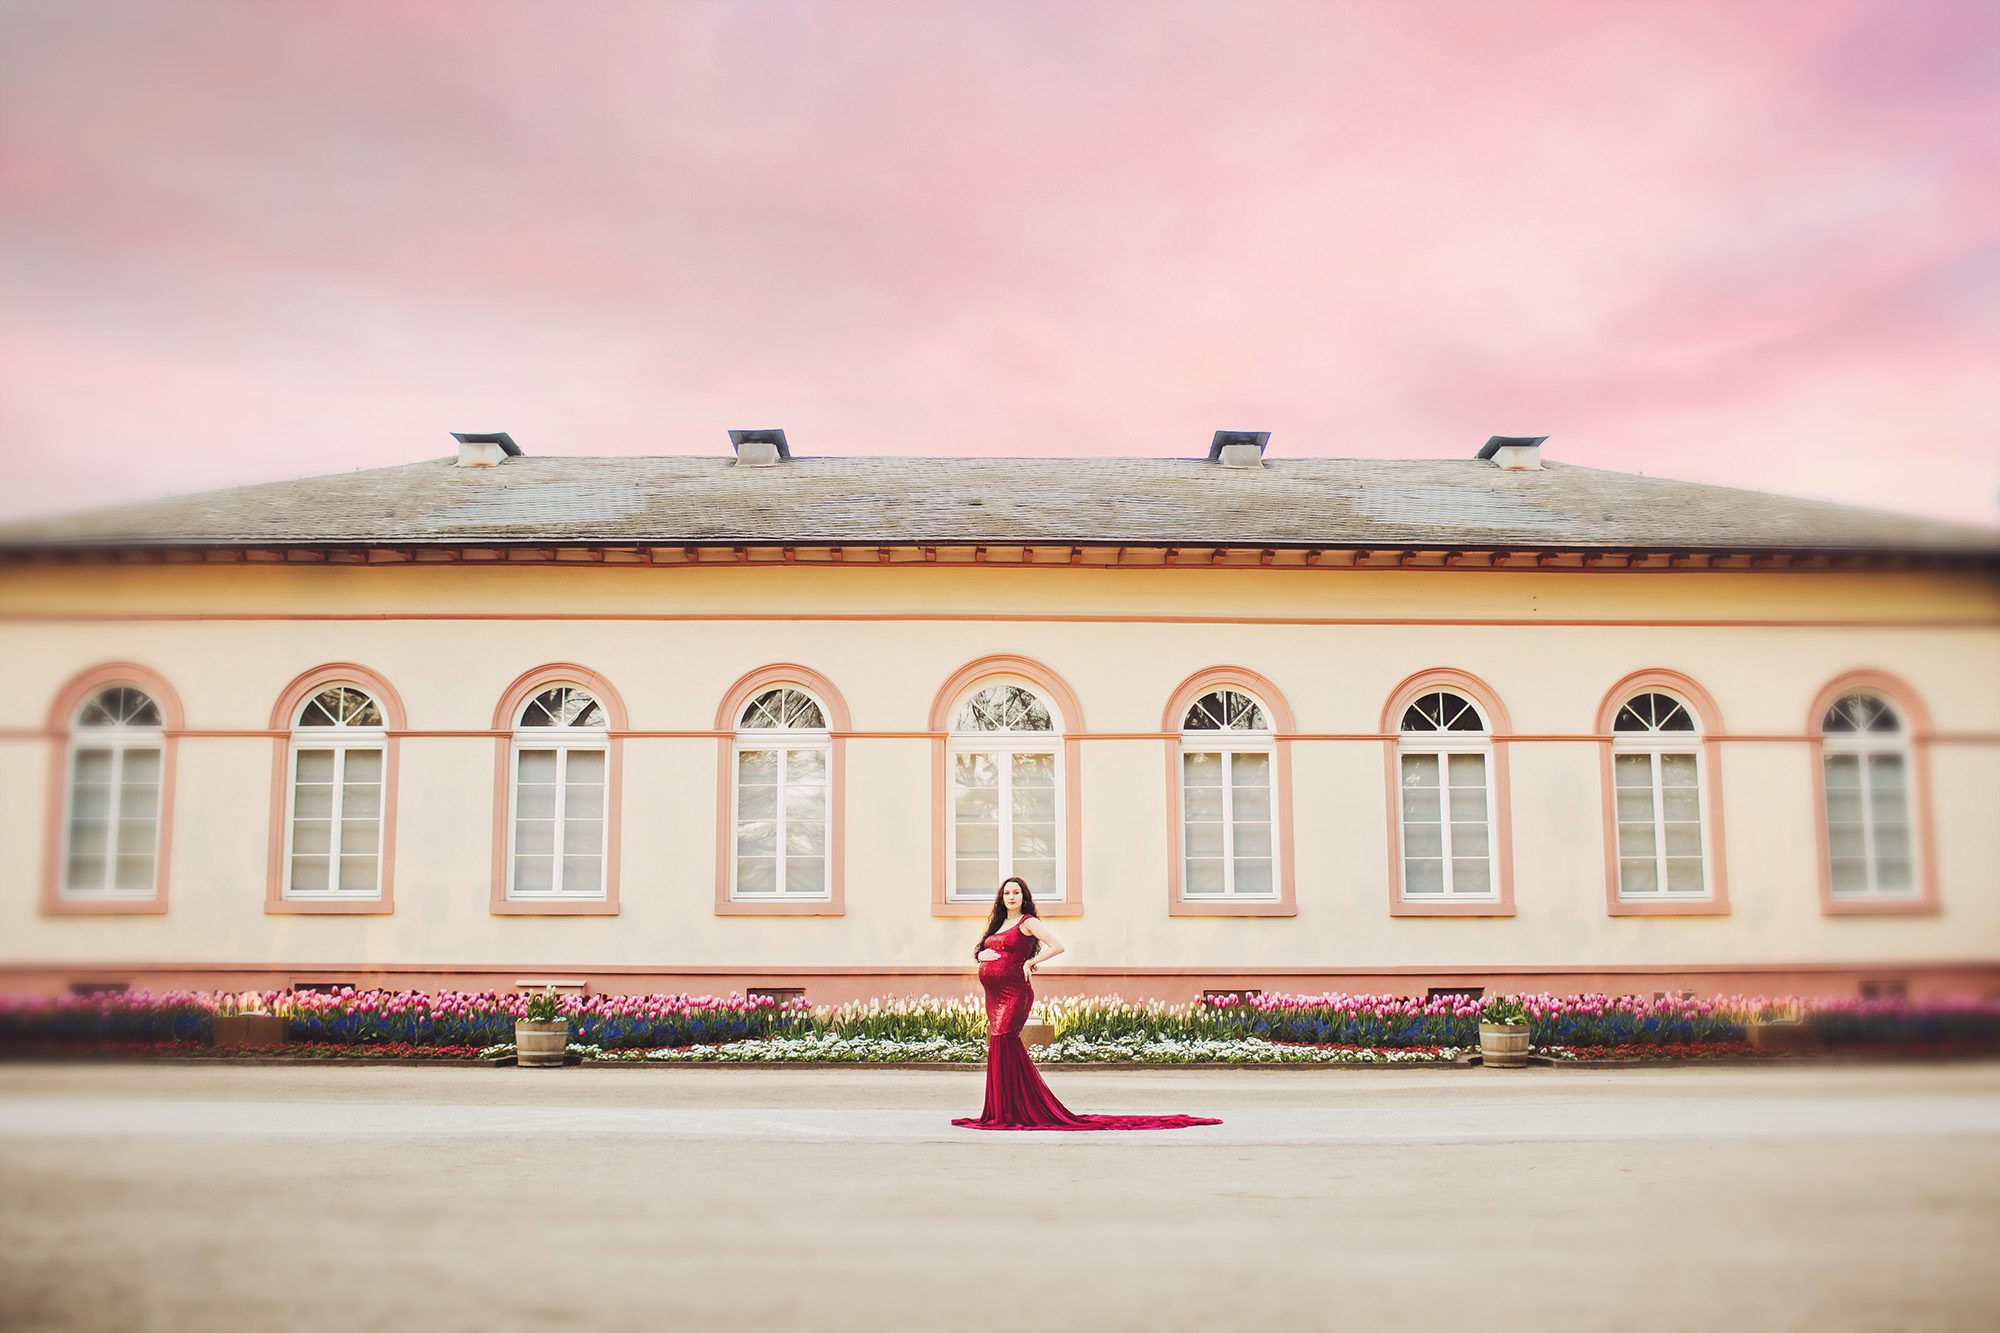 A barrage of tulips against the Kurpark bank in Bad Homburg as a breathtaking backdrop for Kallyn's maternity session